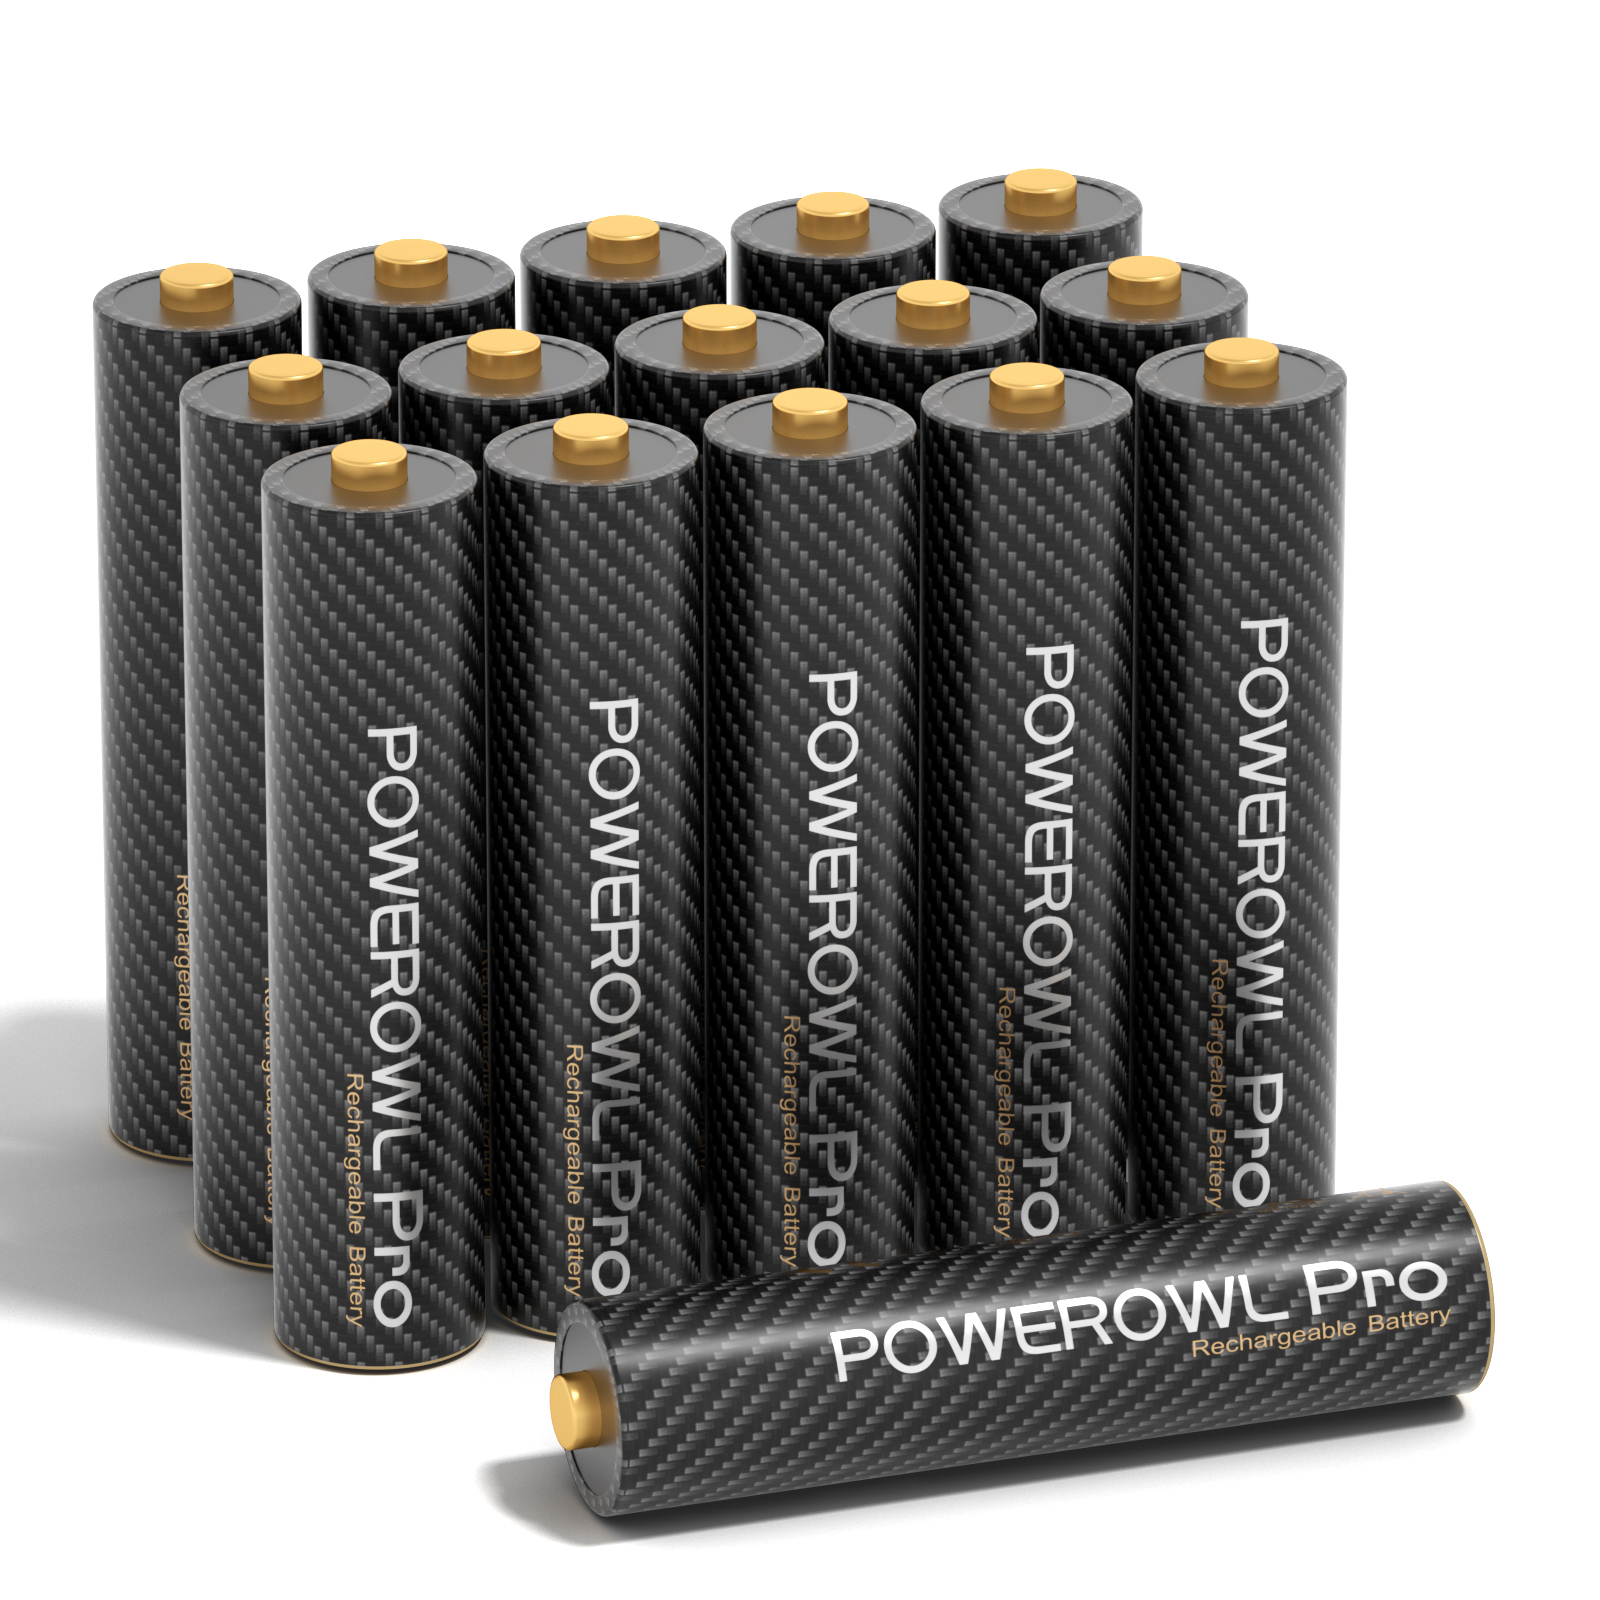 POWEROWL Rechargeable AAA Batteries PRO, High Capacity 1100mAh, Premium NiMH Triple A Battery -16 Count- $24.99